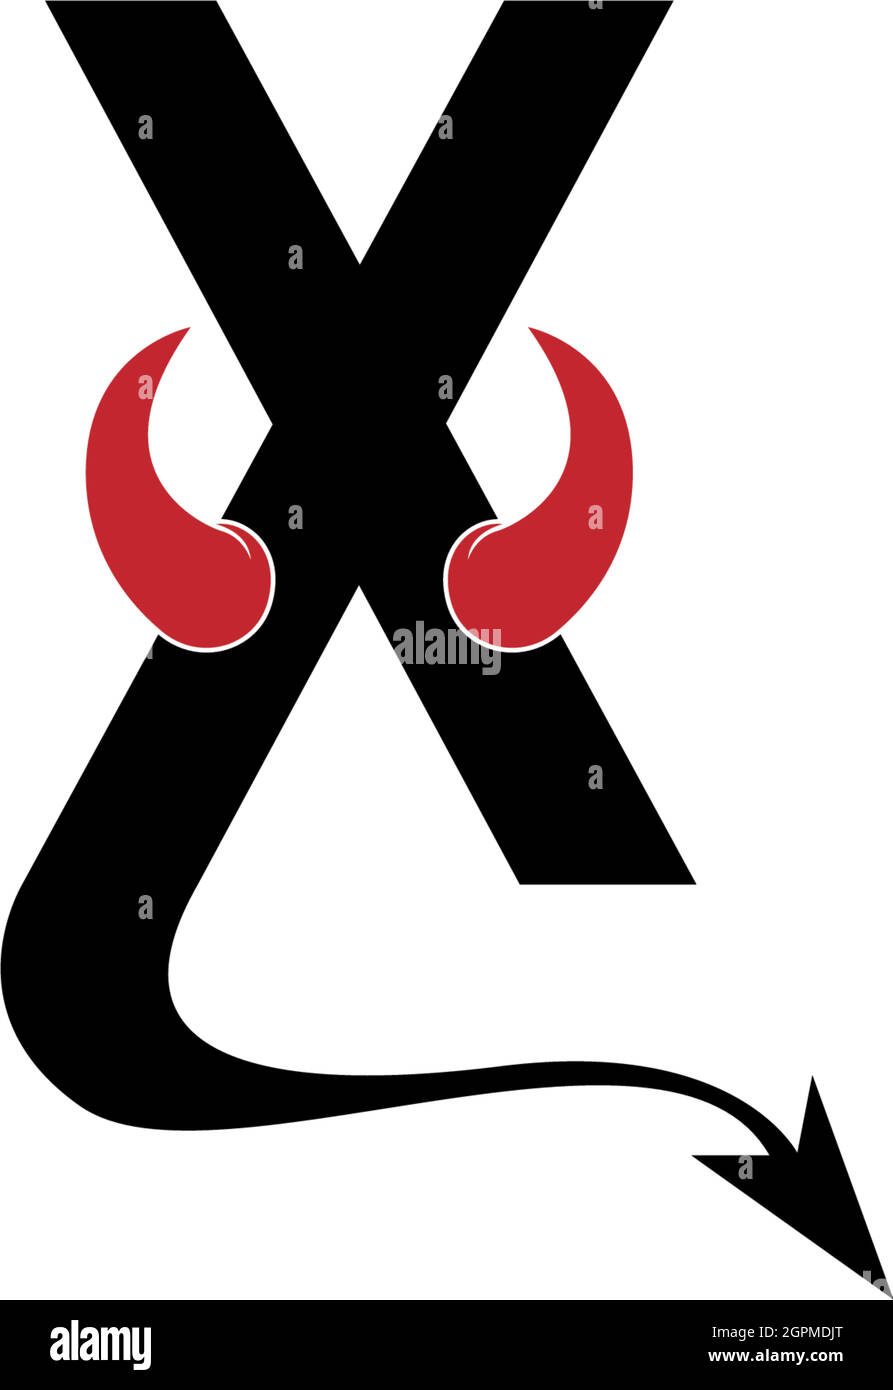 Letter X with devil's horns and tail icon logo design vector Stock Vector